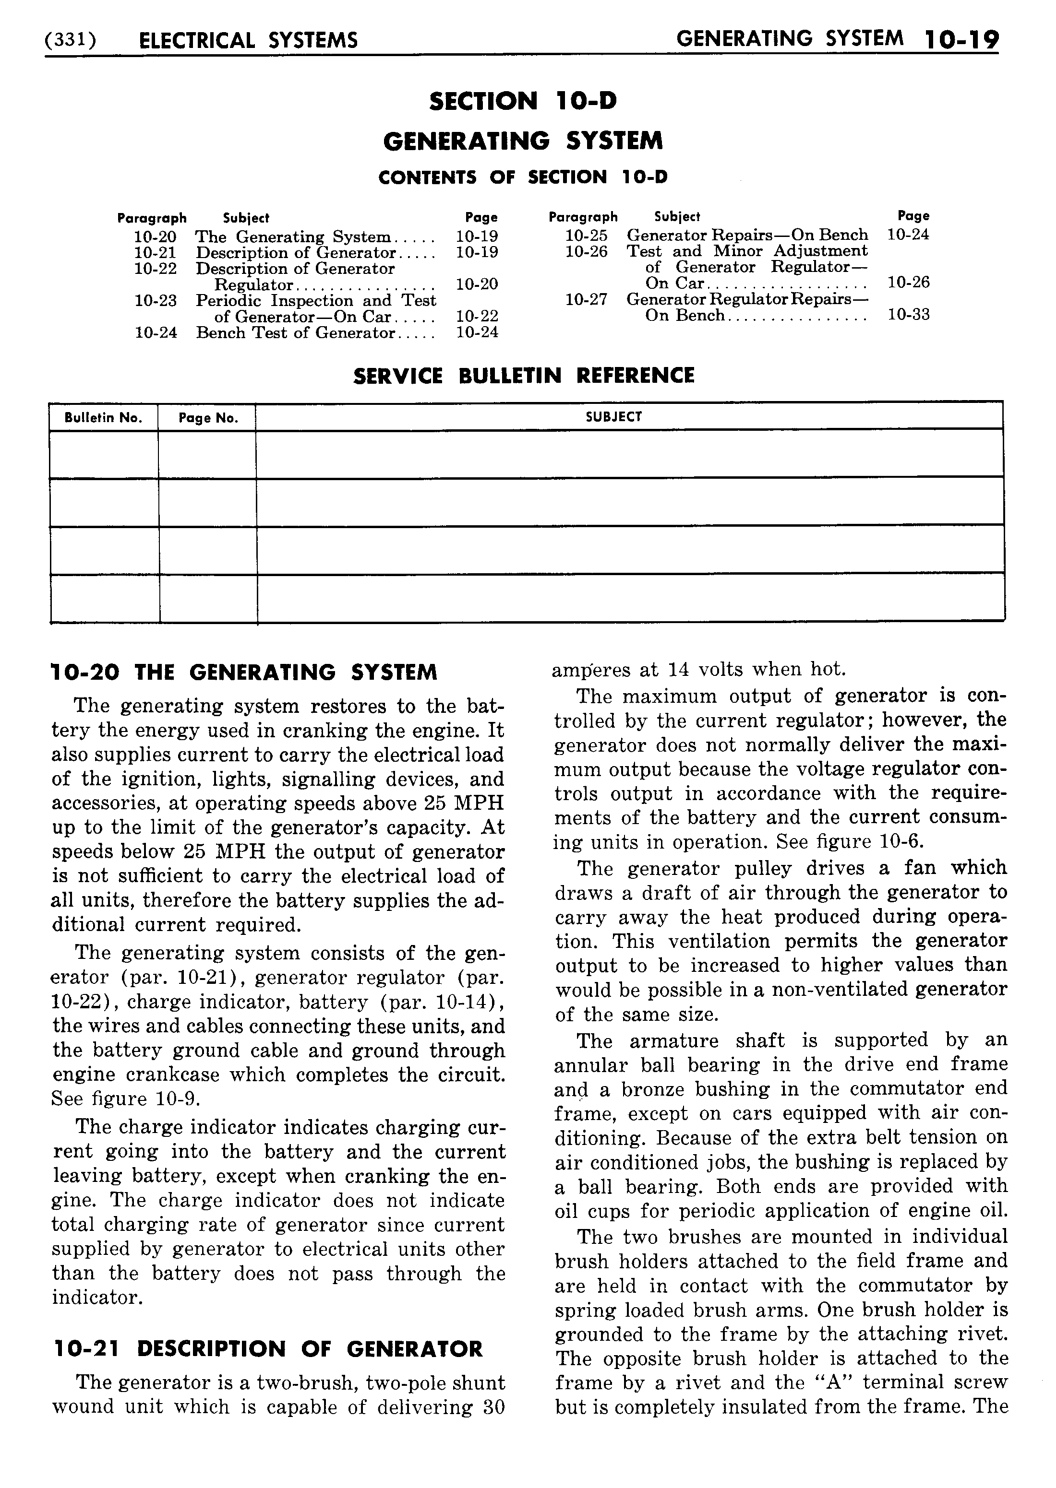 n_11 1954 Buick Shop Manual - Electrical Systems-019-019.jpg